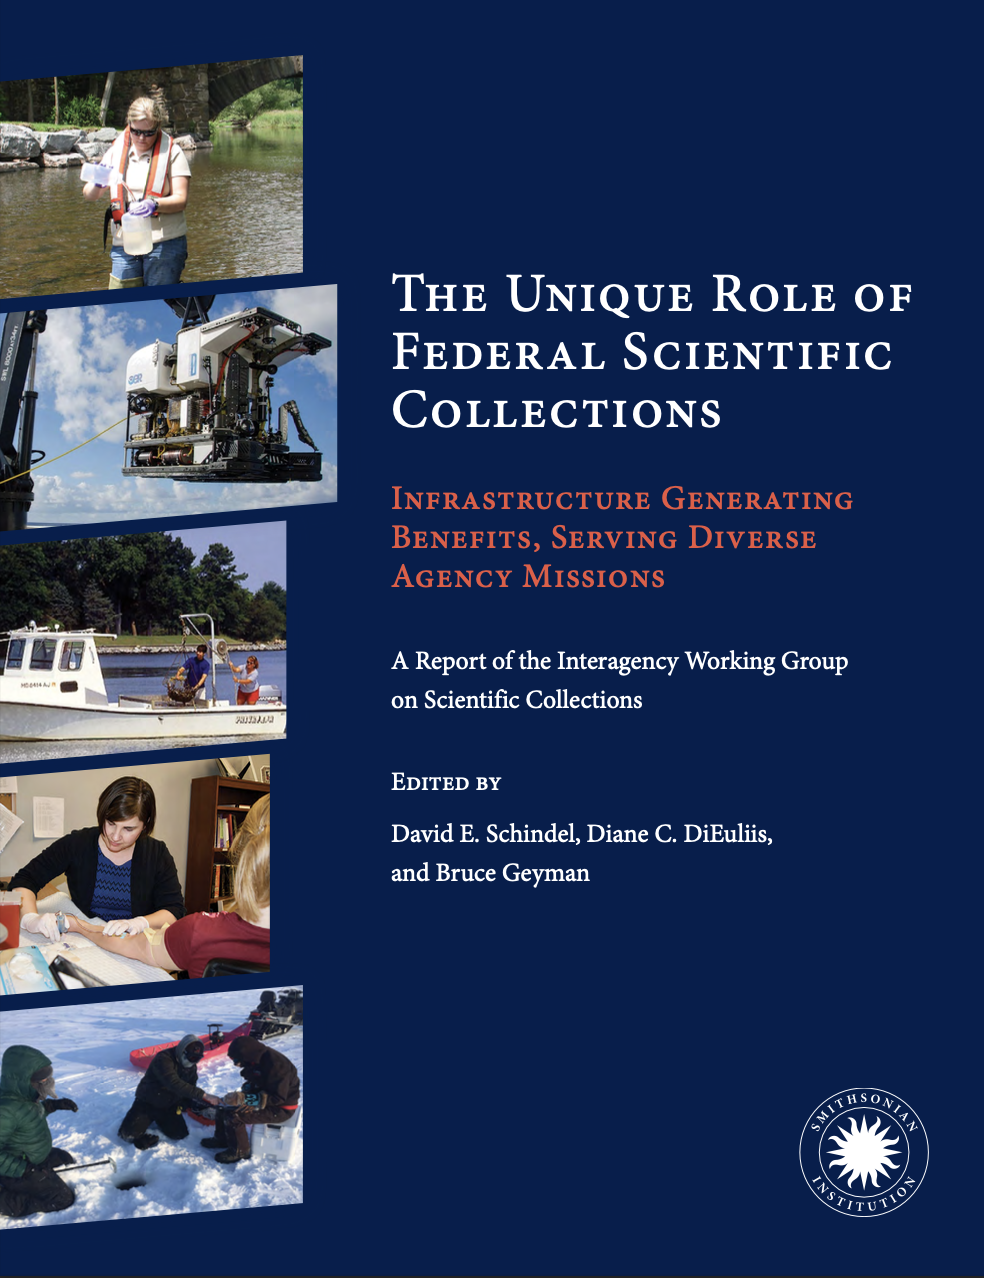 The Unique Role of Federal Scientific Collections